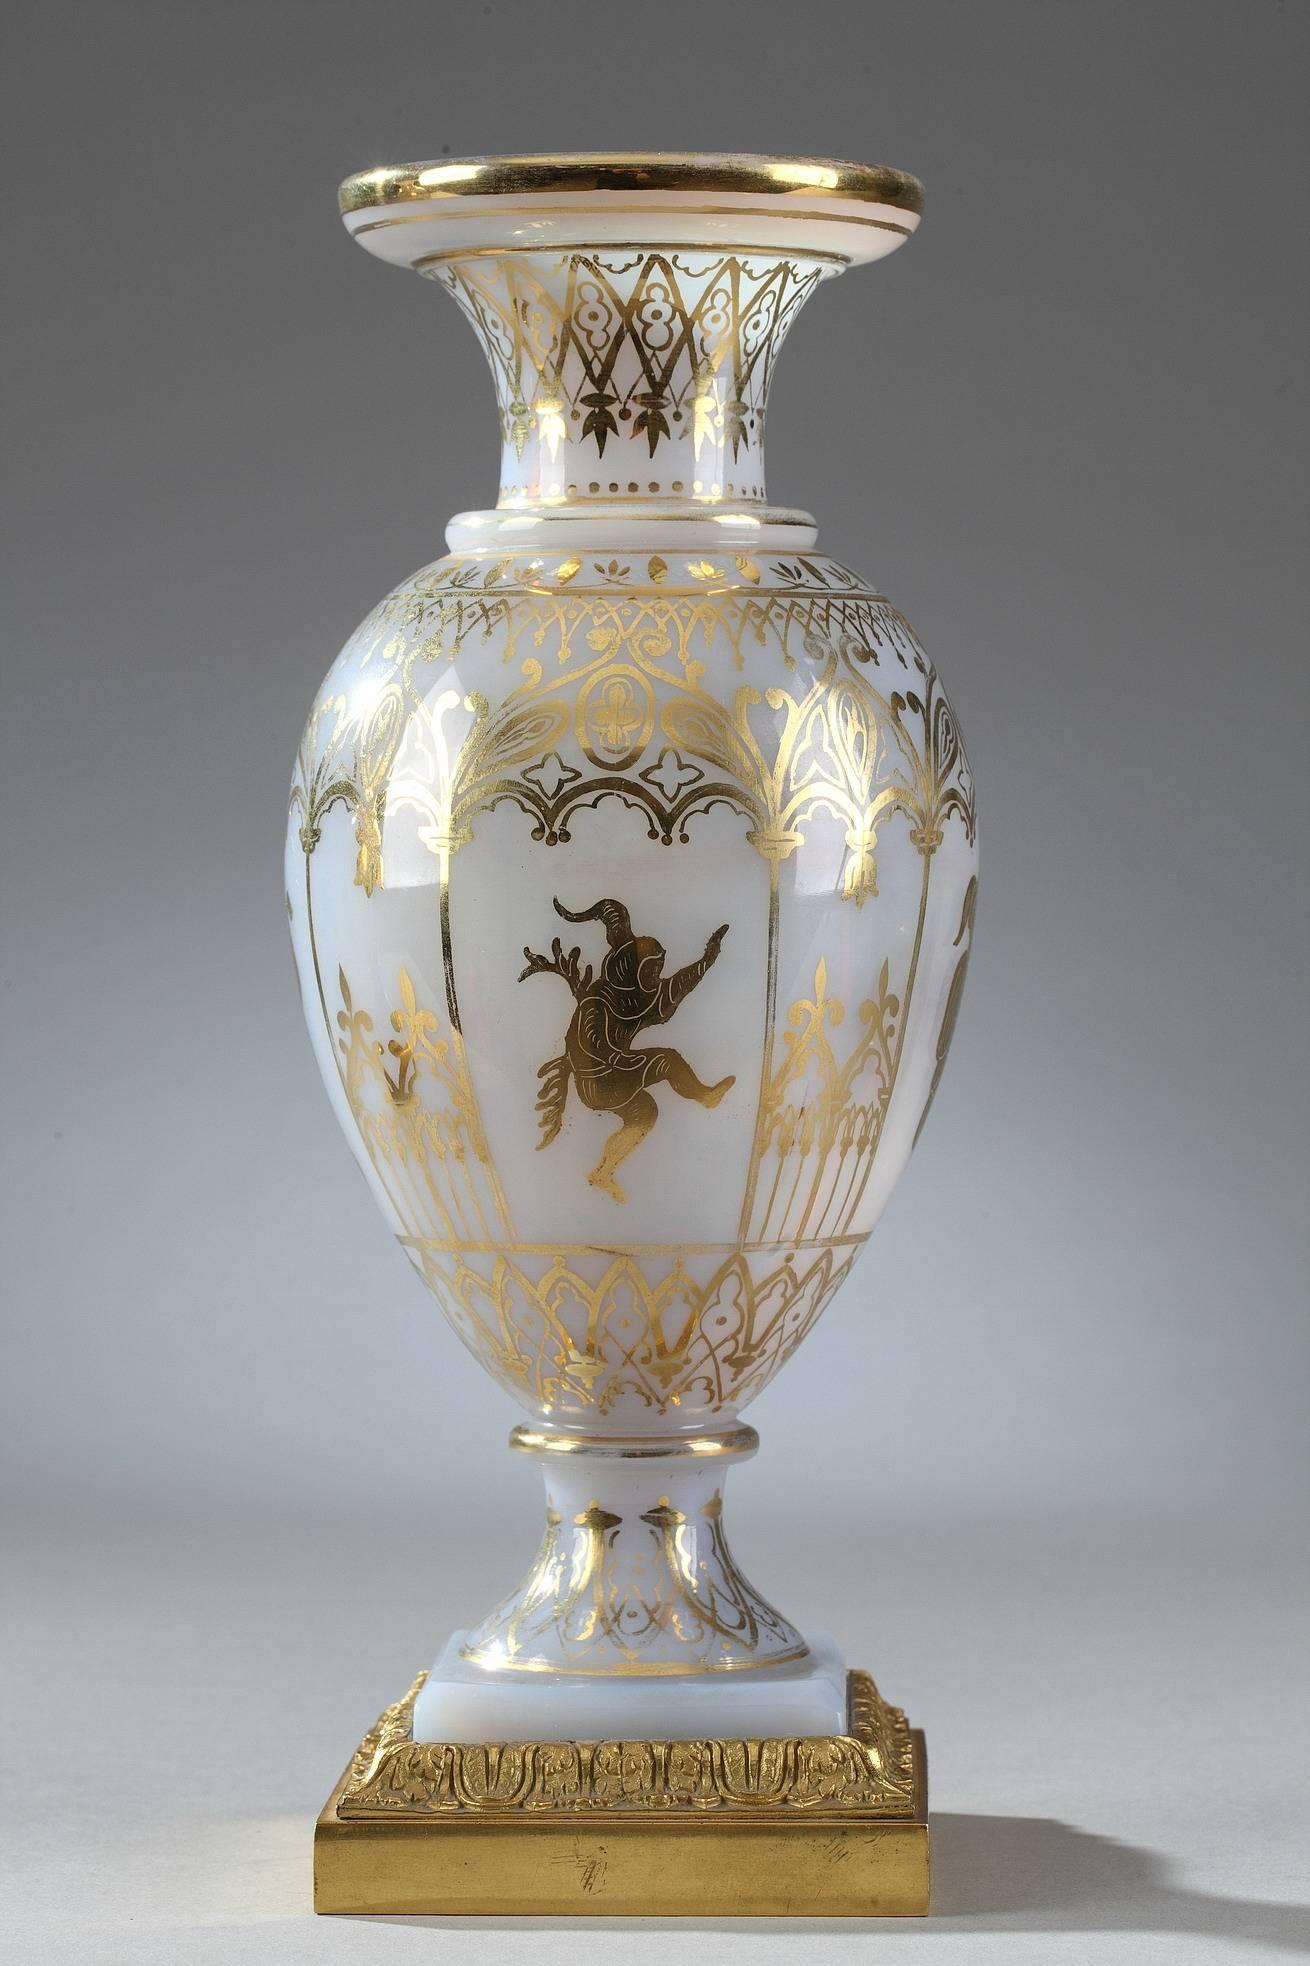 Pair of white opaline glass vases decorated with gilded Gothic arcades and medieval figures playing music or dancing. Each vase rests on a square gilt bronze base embellished with foliage. This delicate decoration was produced by the Jean-Baptiste